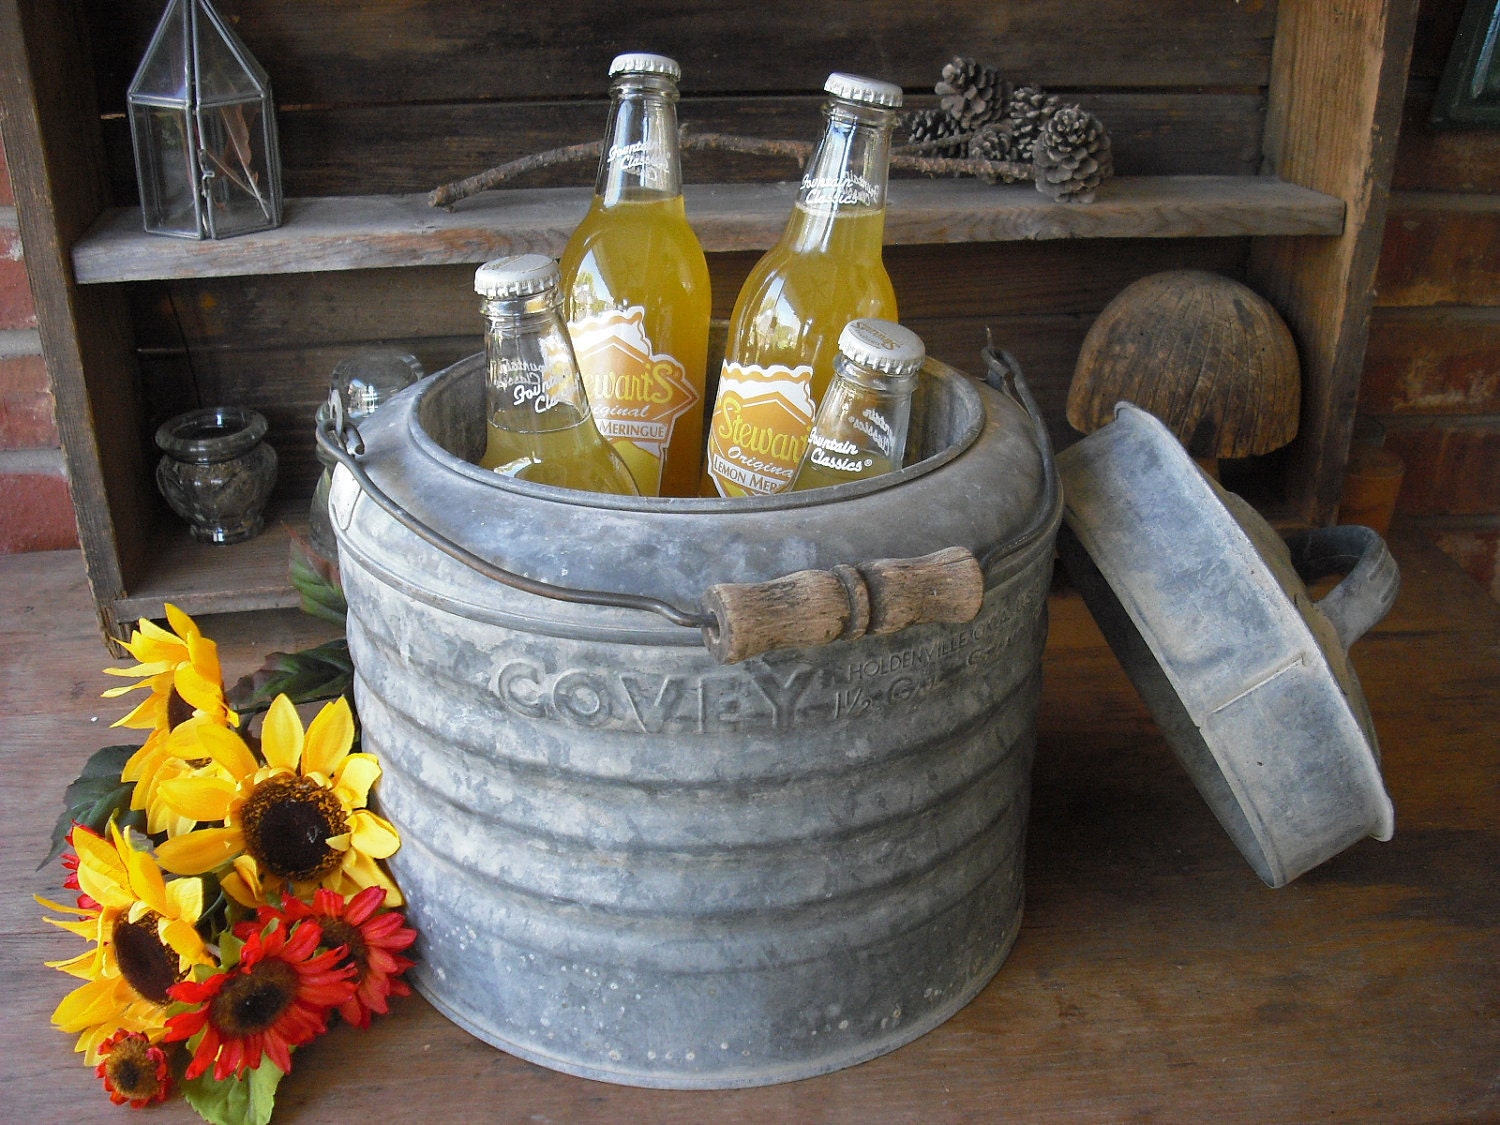 WATER COOLER, Canteen, Galvanized Metal, made by COVEY, Vinatge, Rustic